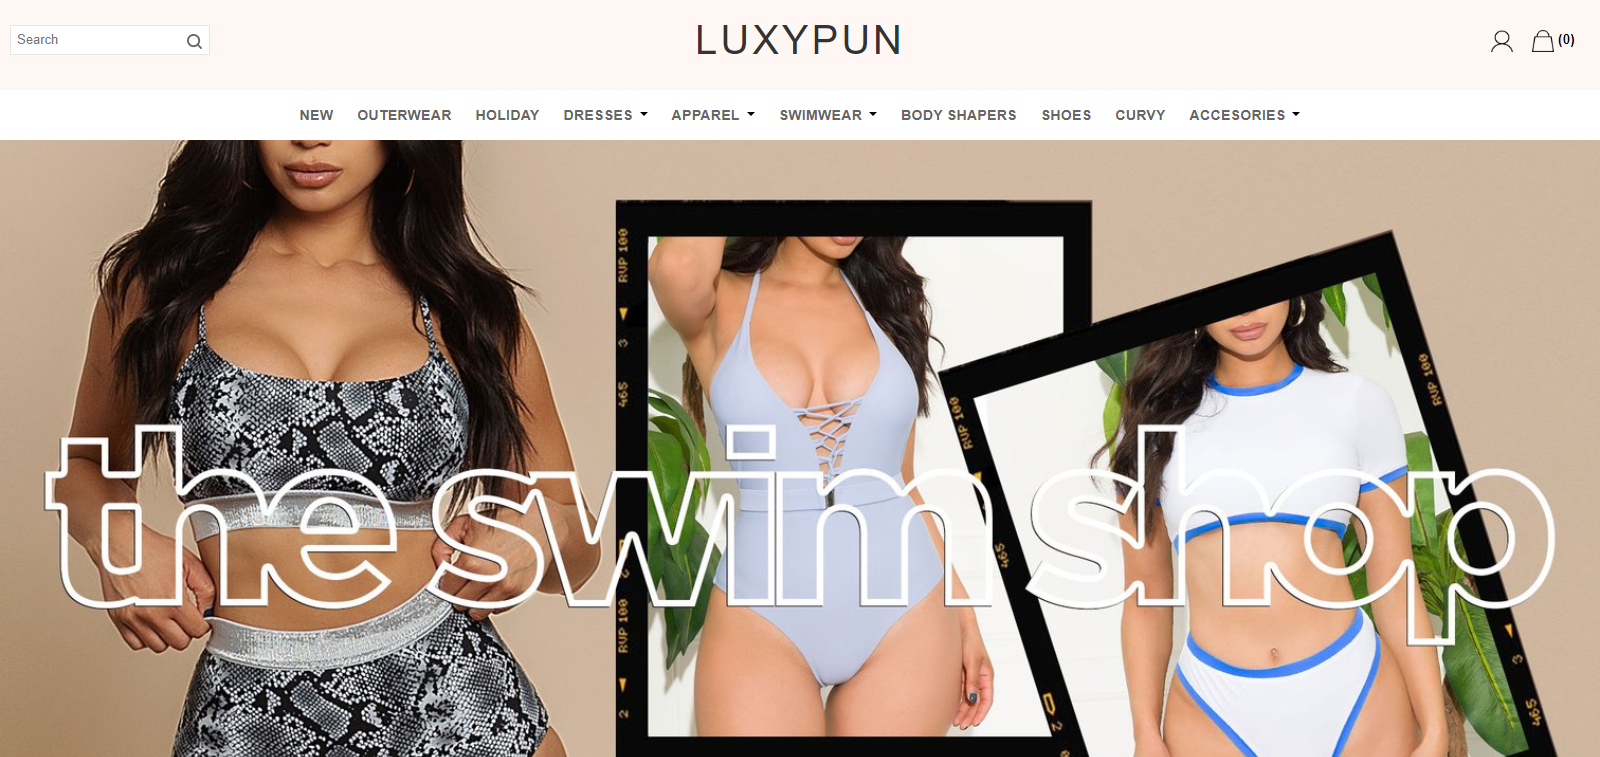 Luxypun Homepage Image